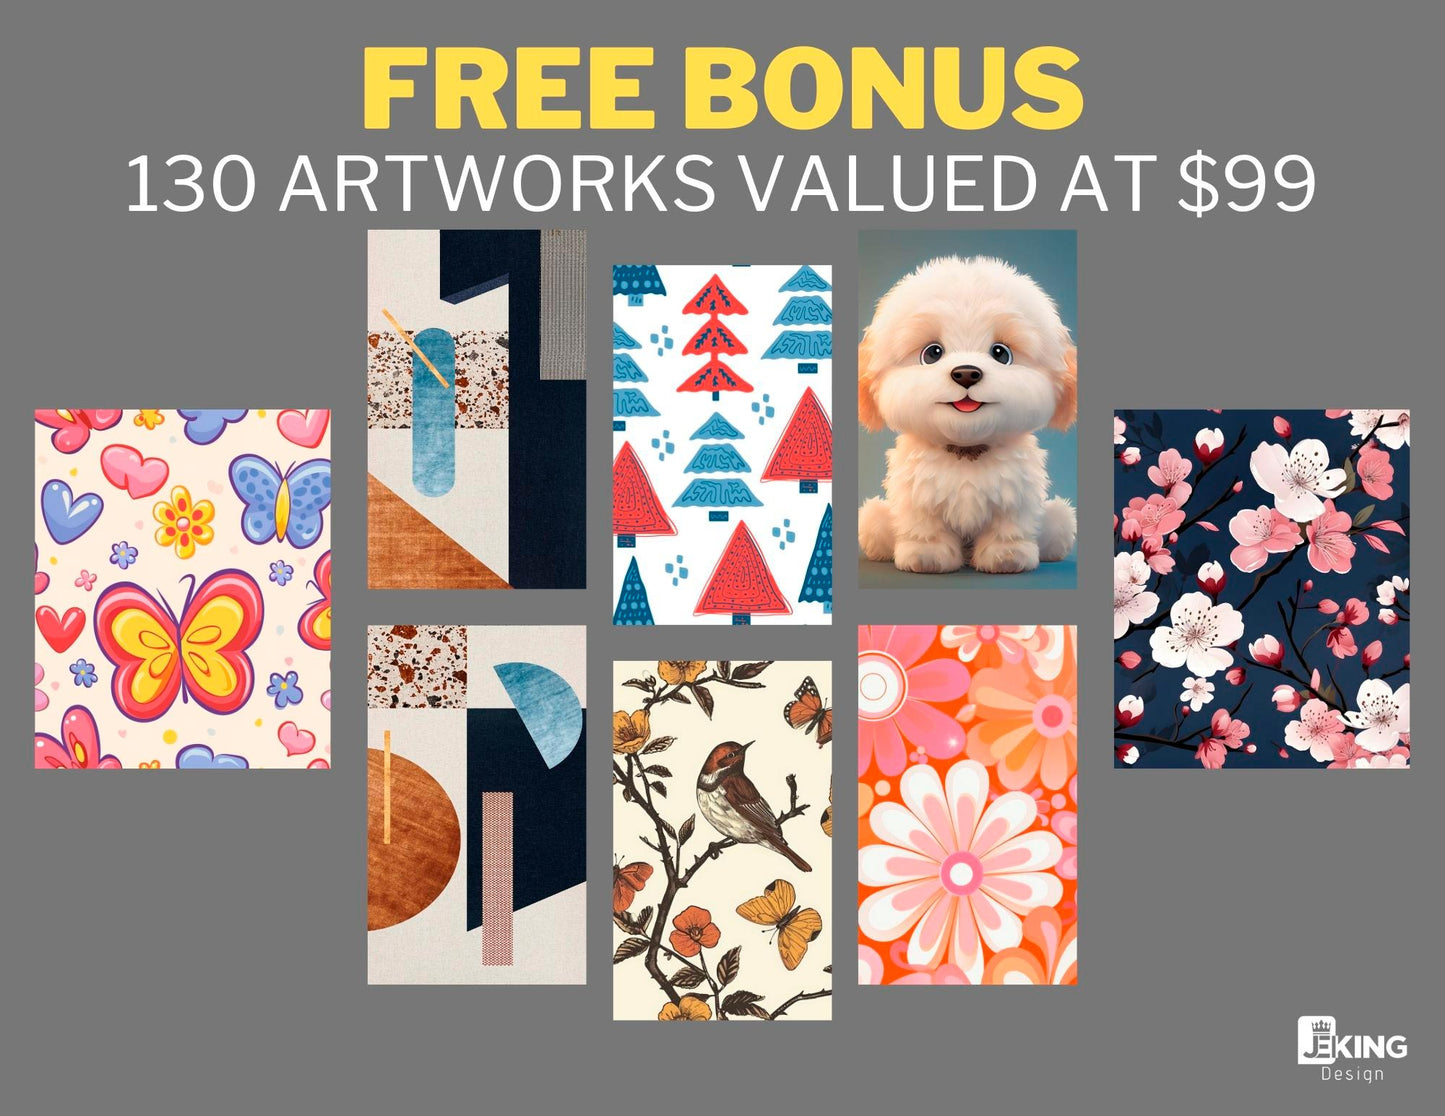 Aroma of Heritage + Free Bonus Valued at $99: Buy Two, Get One Free – Three Premium Digital Artworks for the Price of Two. High-Resolution PNG and PDF Downloads for Home and Office Decor